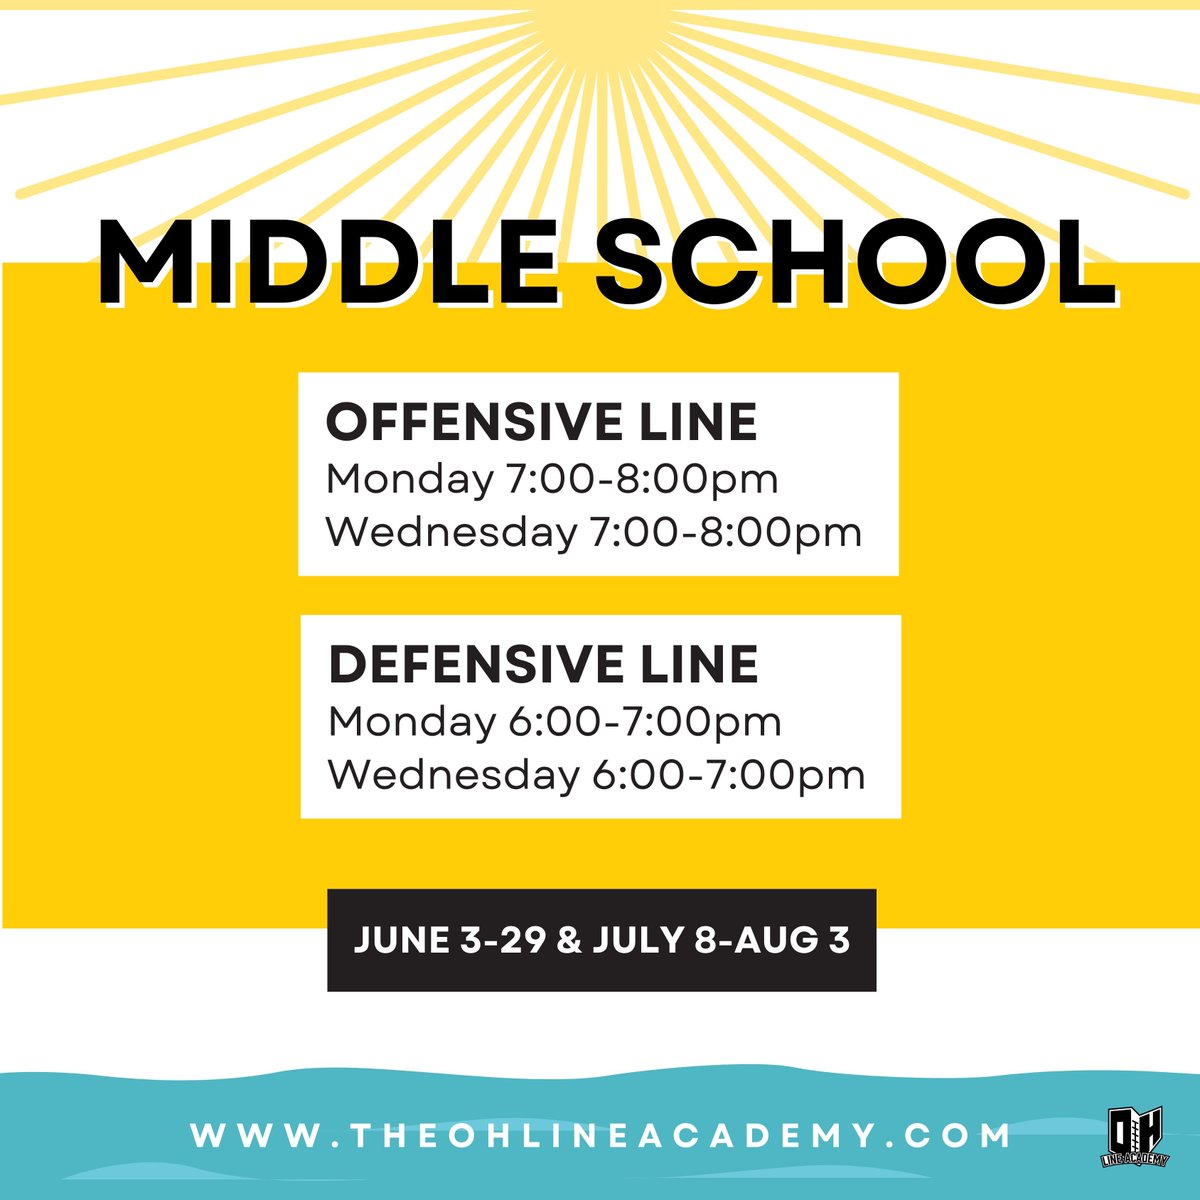 Spring is quickly ending, and with it, comes our final opportunity to get vital training in before the fall! Our lineup of summer programs consist of offensive and defensive line skills for both middle and high school linemen. Sign ups for our summer programs will open Mon, 5/13!